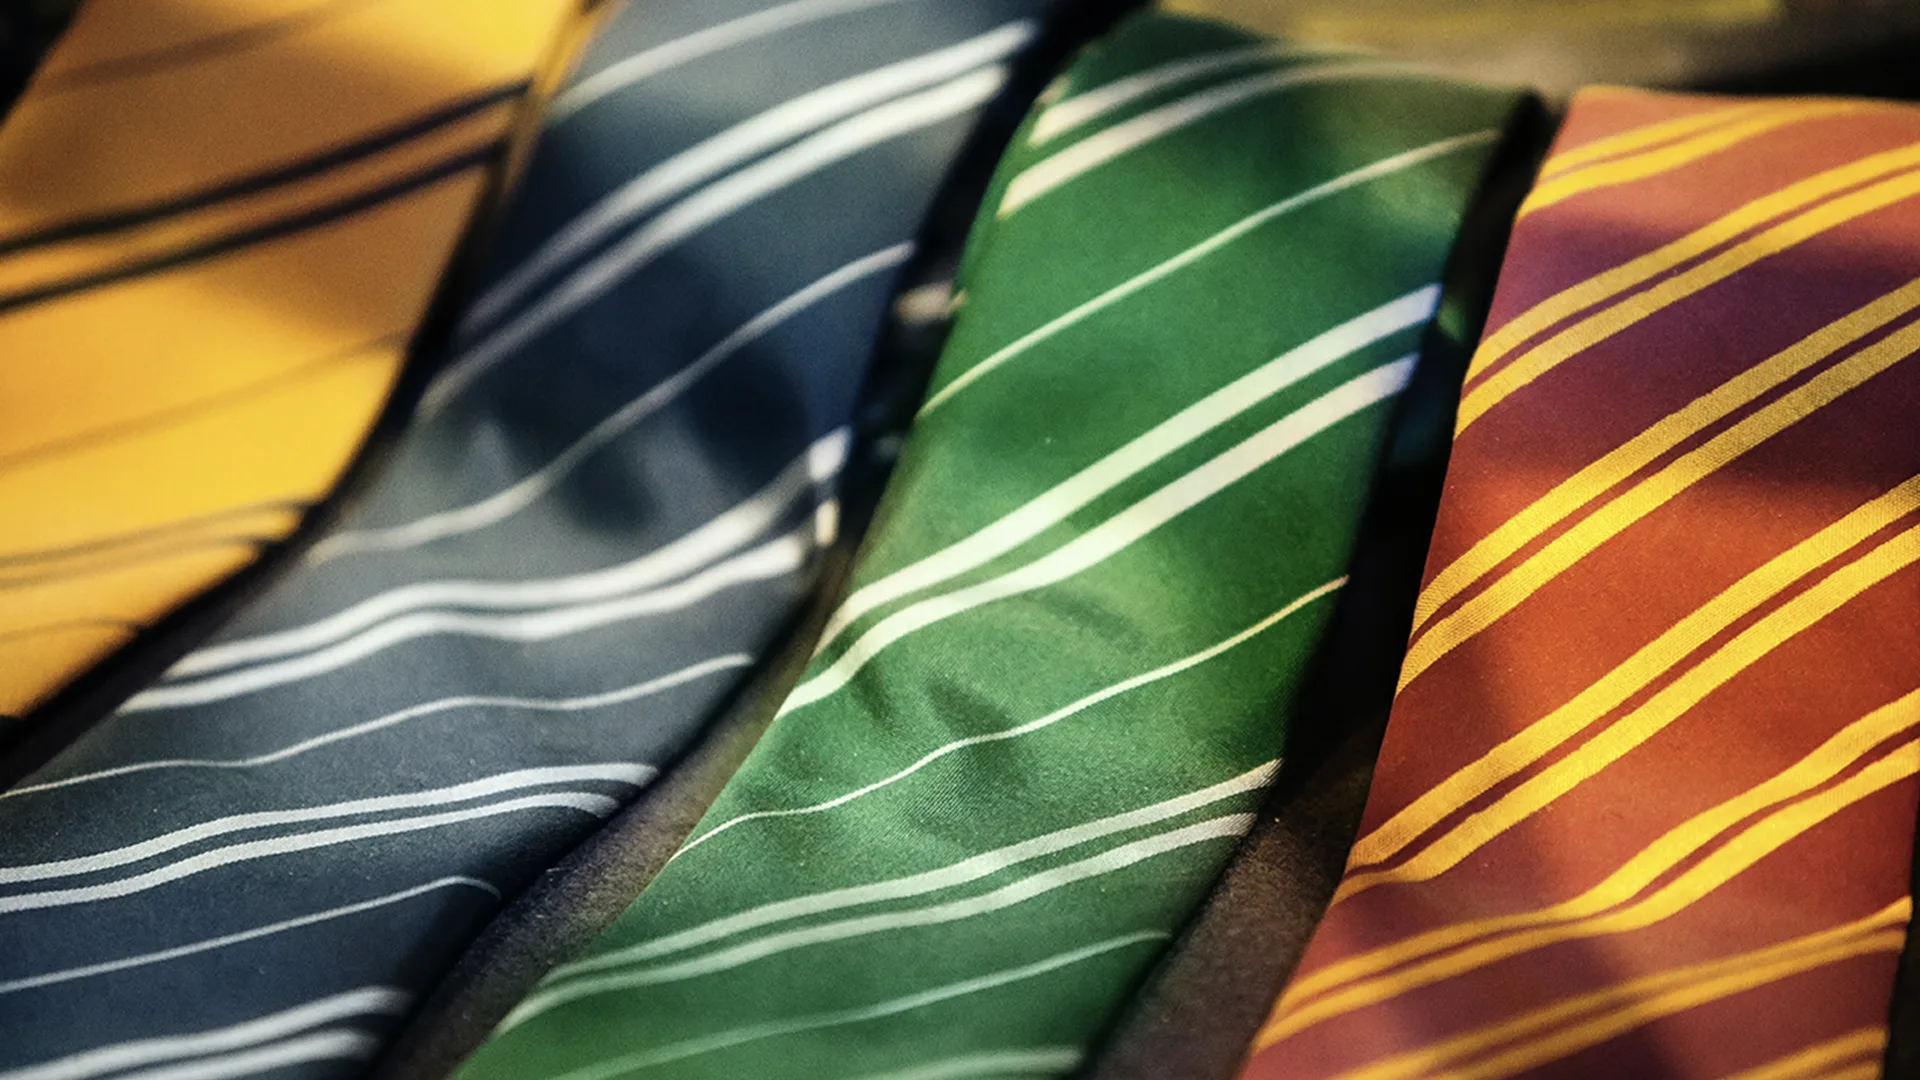 The ties for Hufflepuff, Slytherin, Ravenclaw and Gryffindor